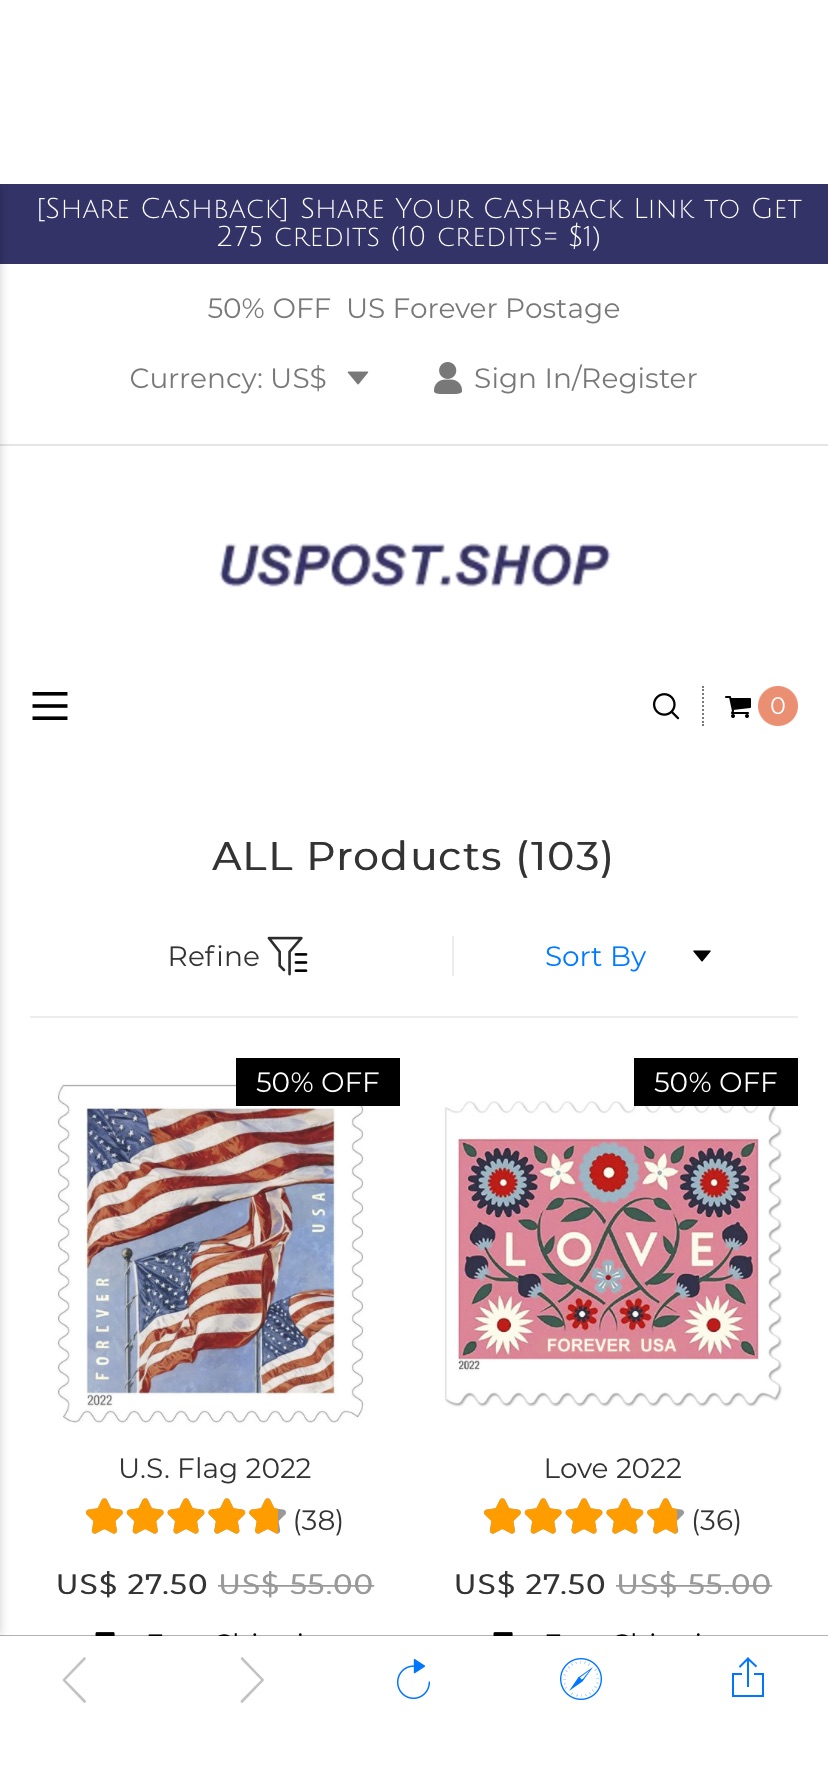 ALL Products - www.uspost.shop